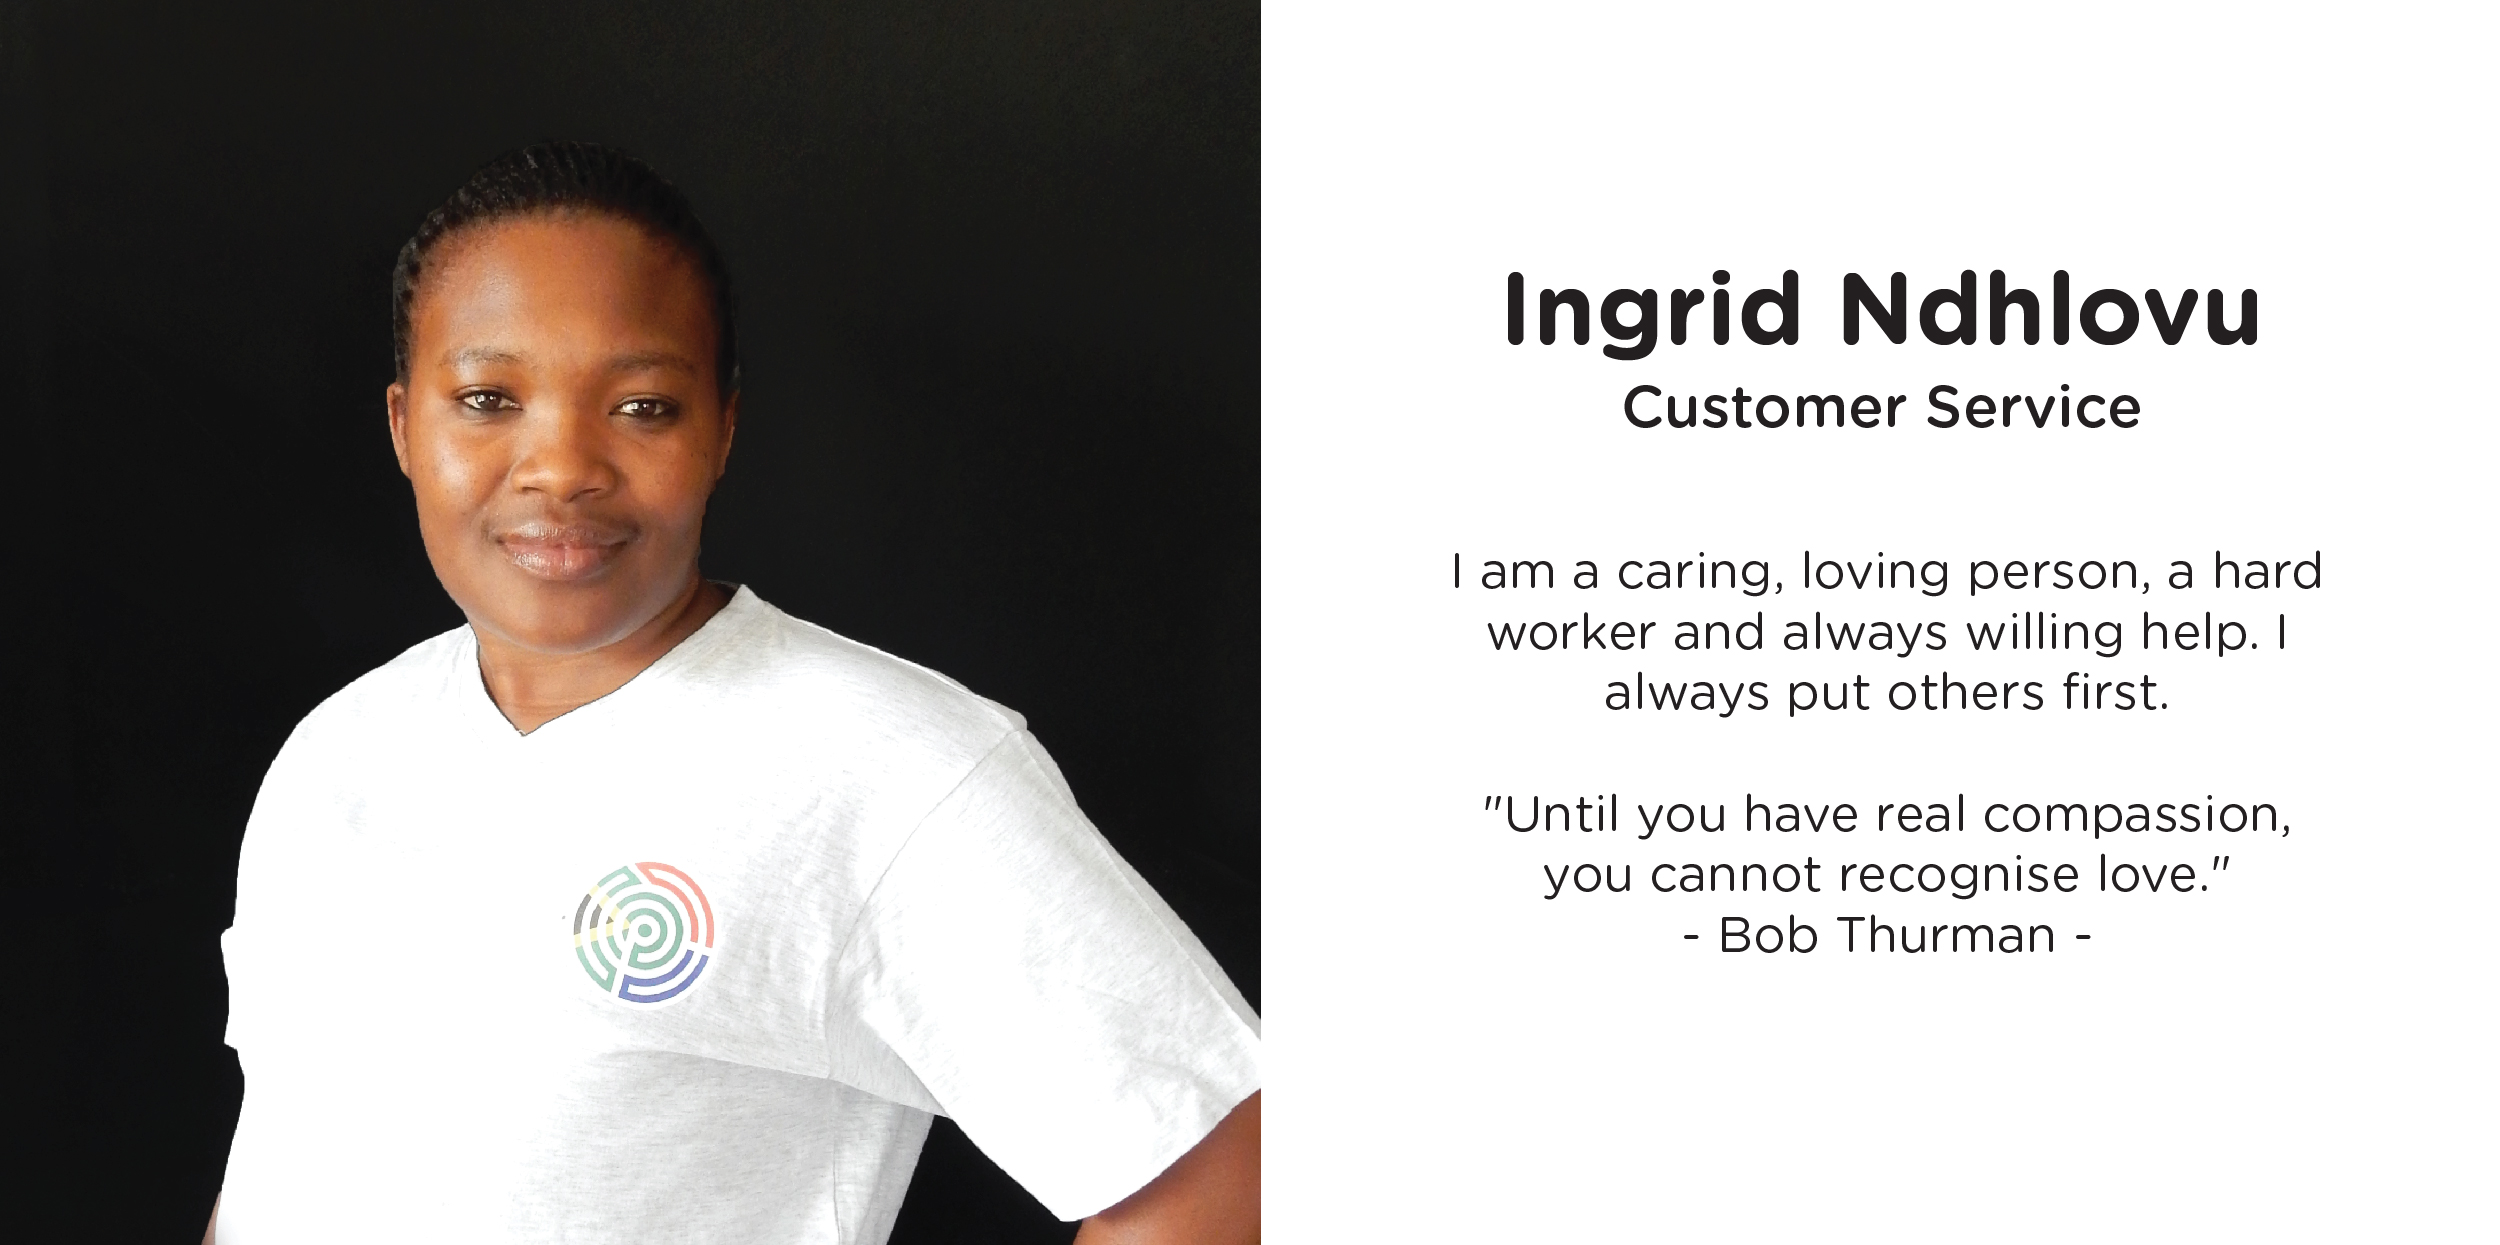 Ingrid from Printulu shares what inspires her